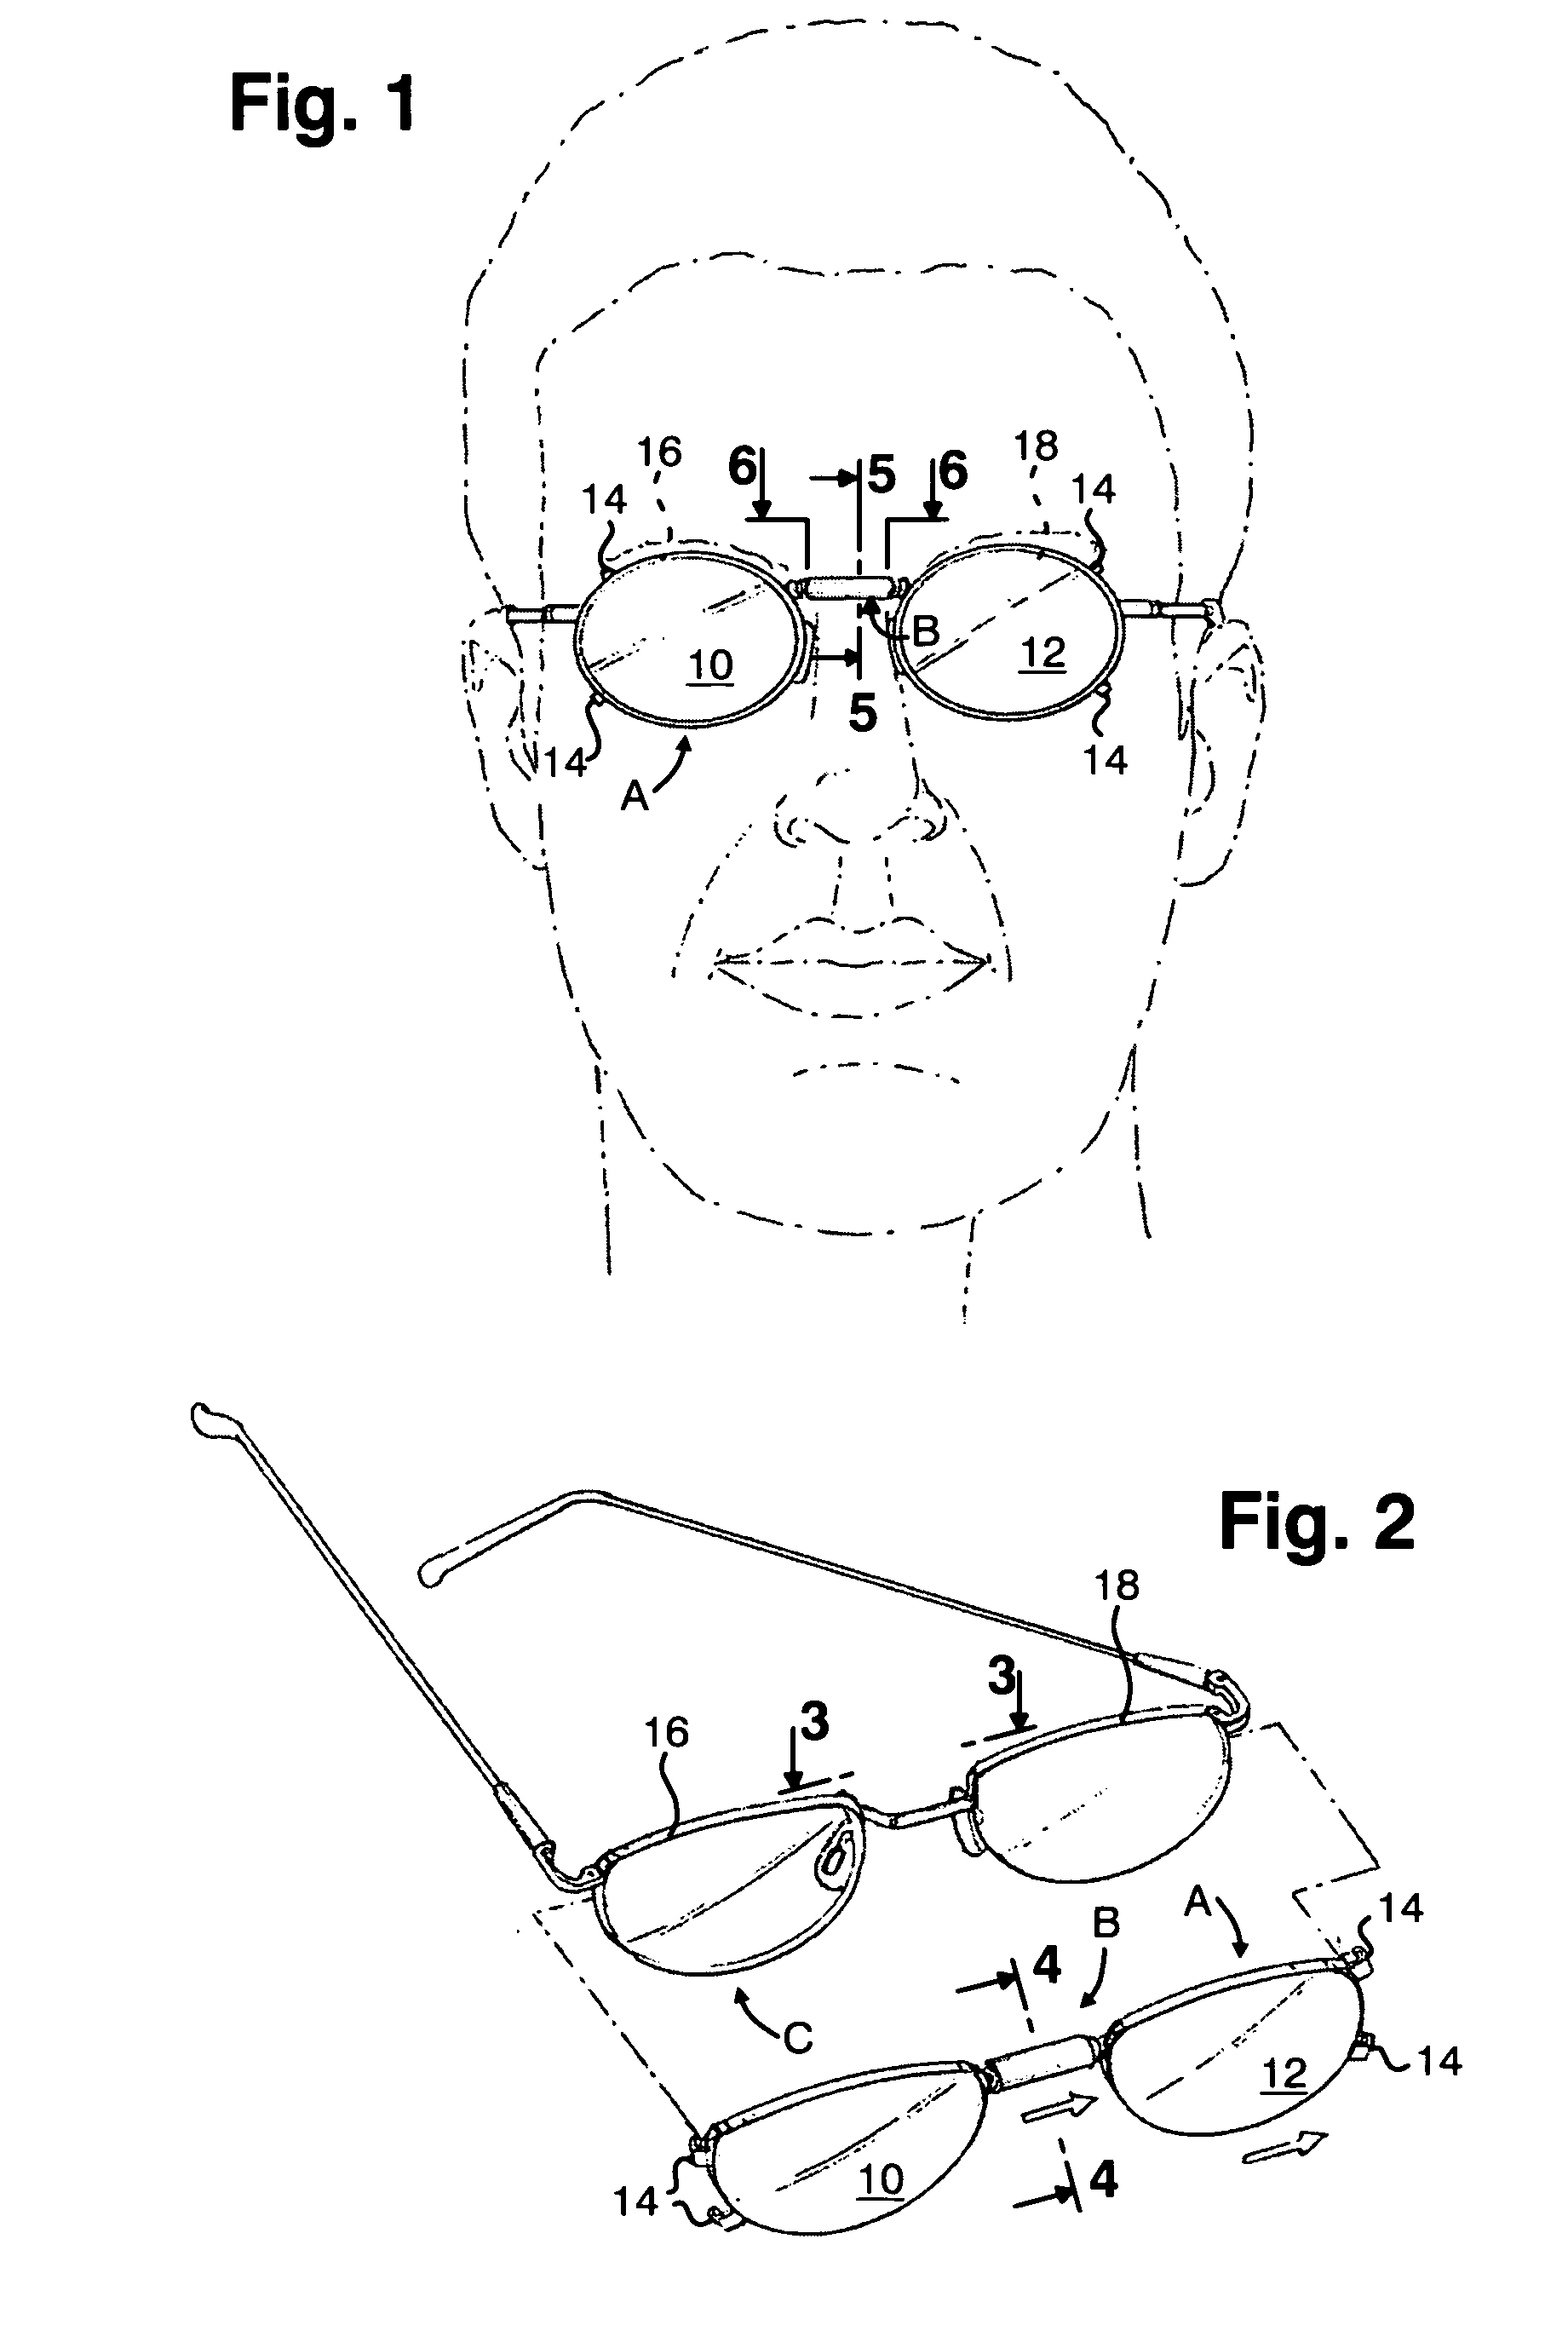 Clip-on with flexible and expandable bridge member